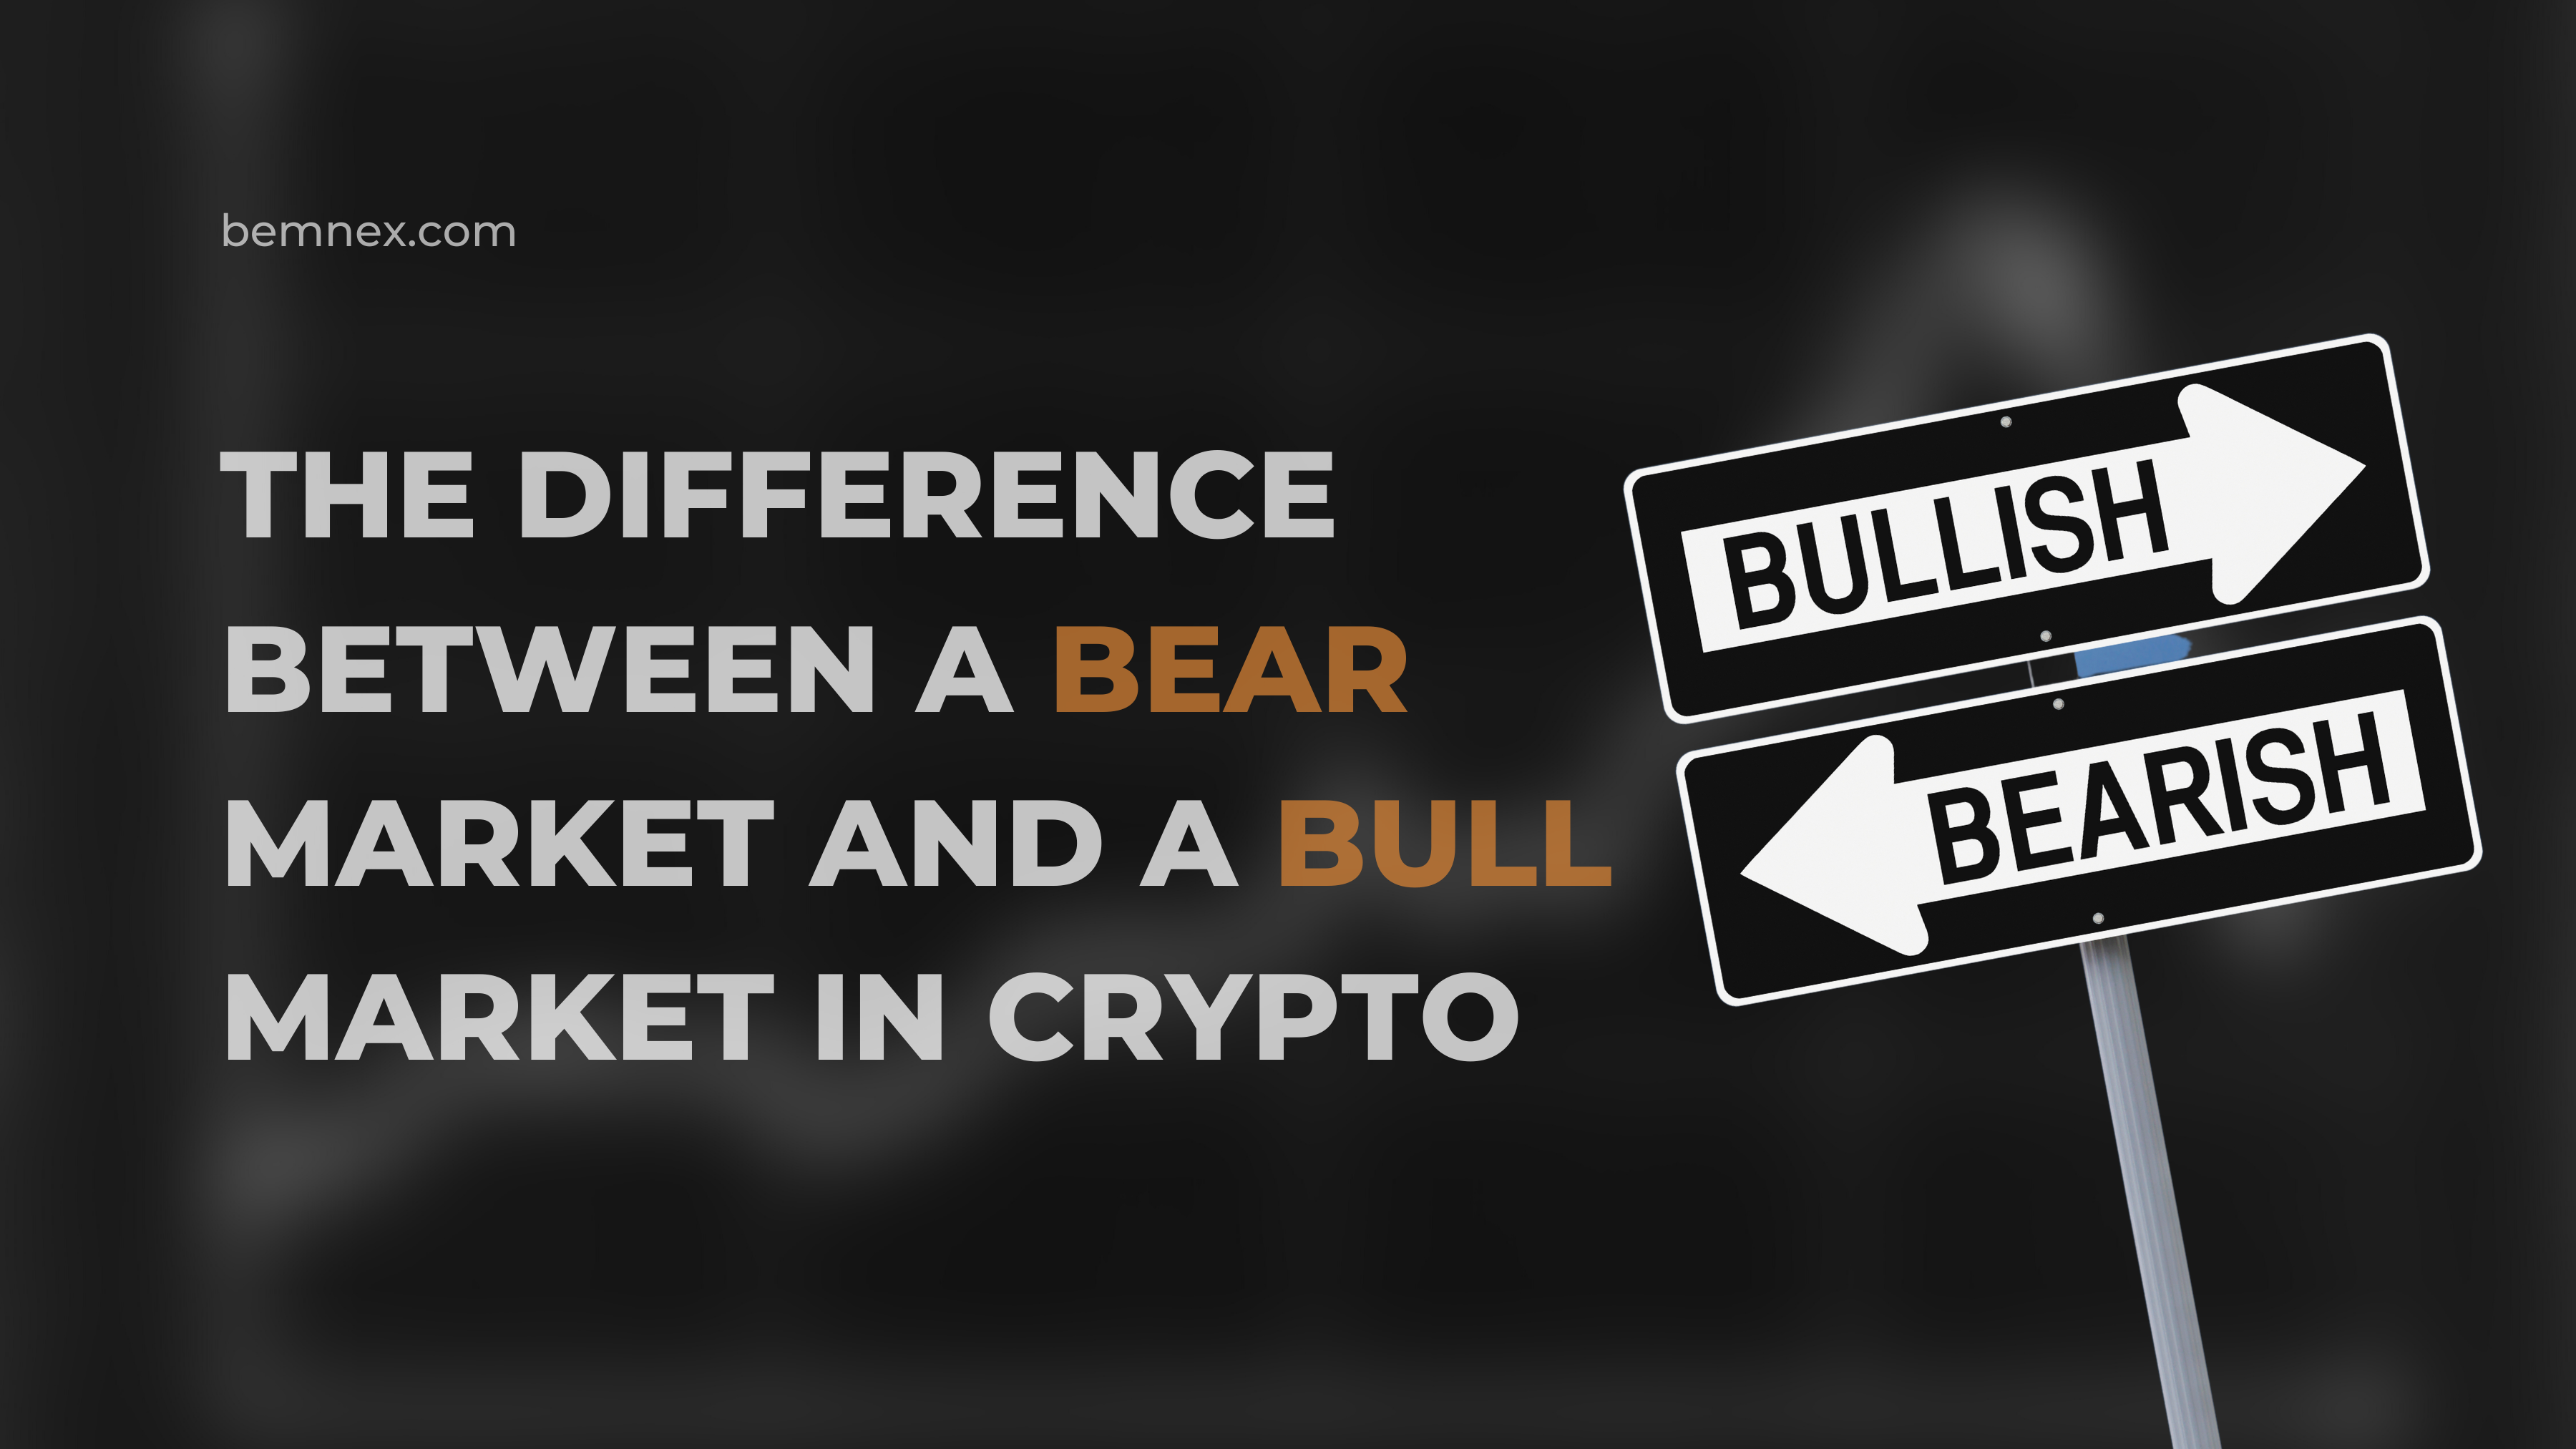 Do you know the difference between a bear market and a bull market in crypto?